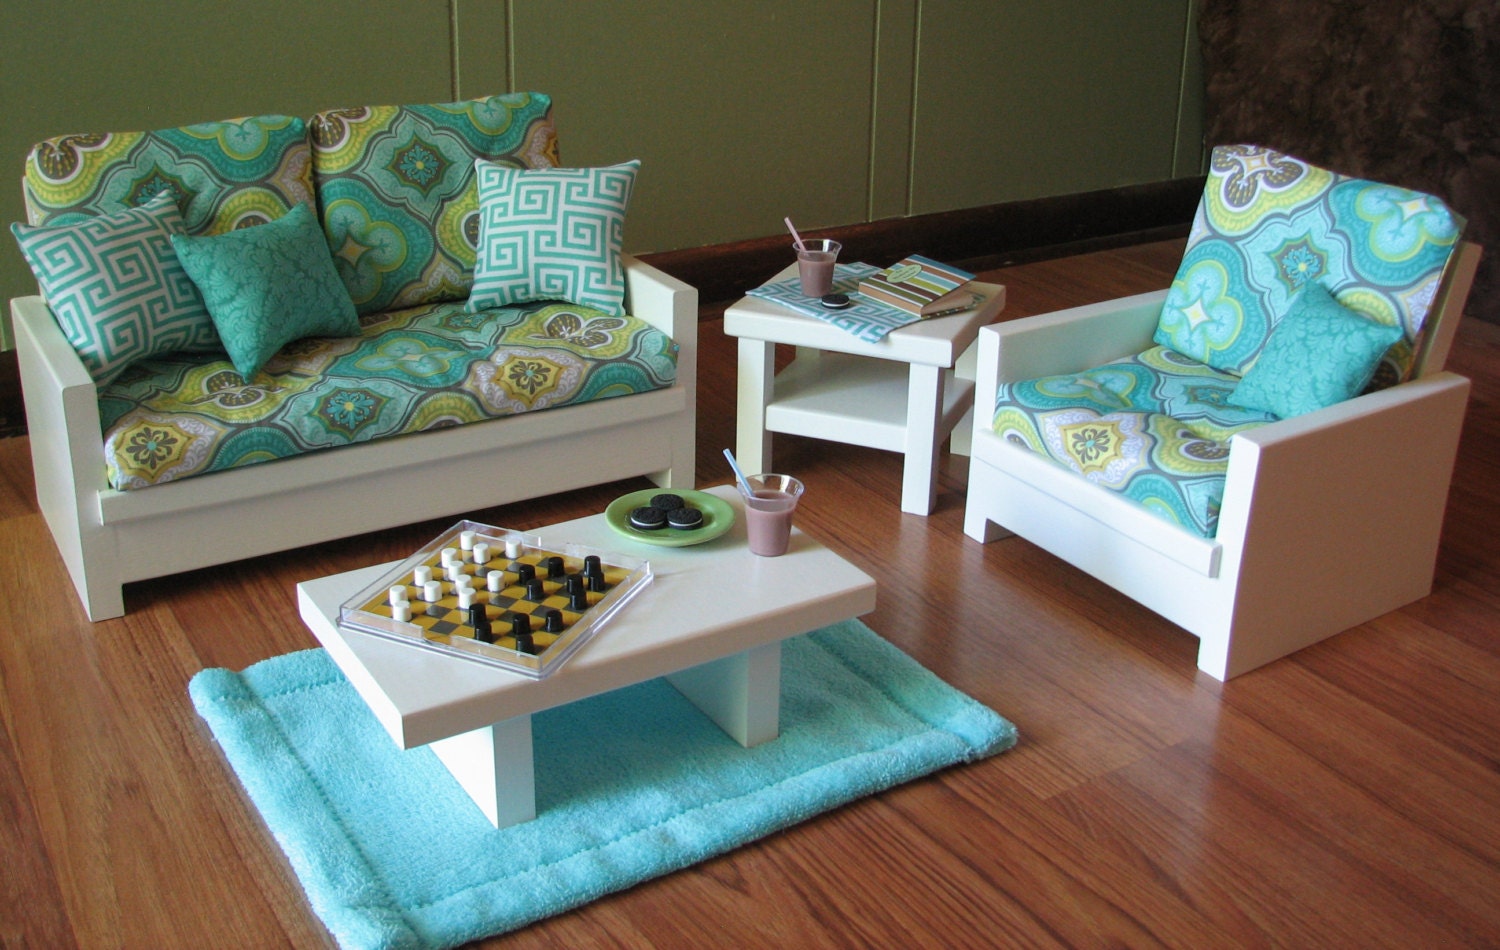 18 in doll living room furniture